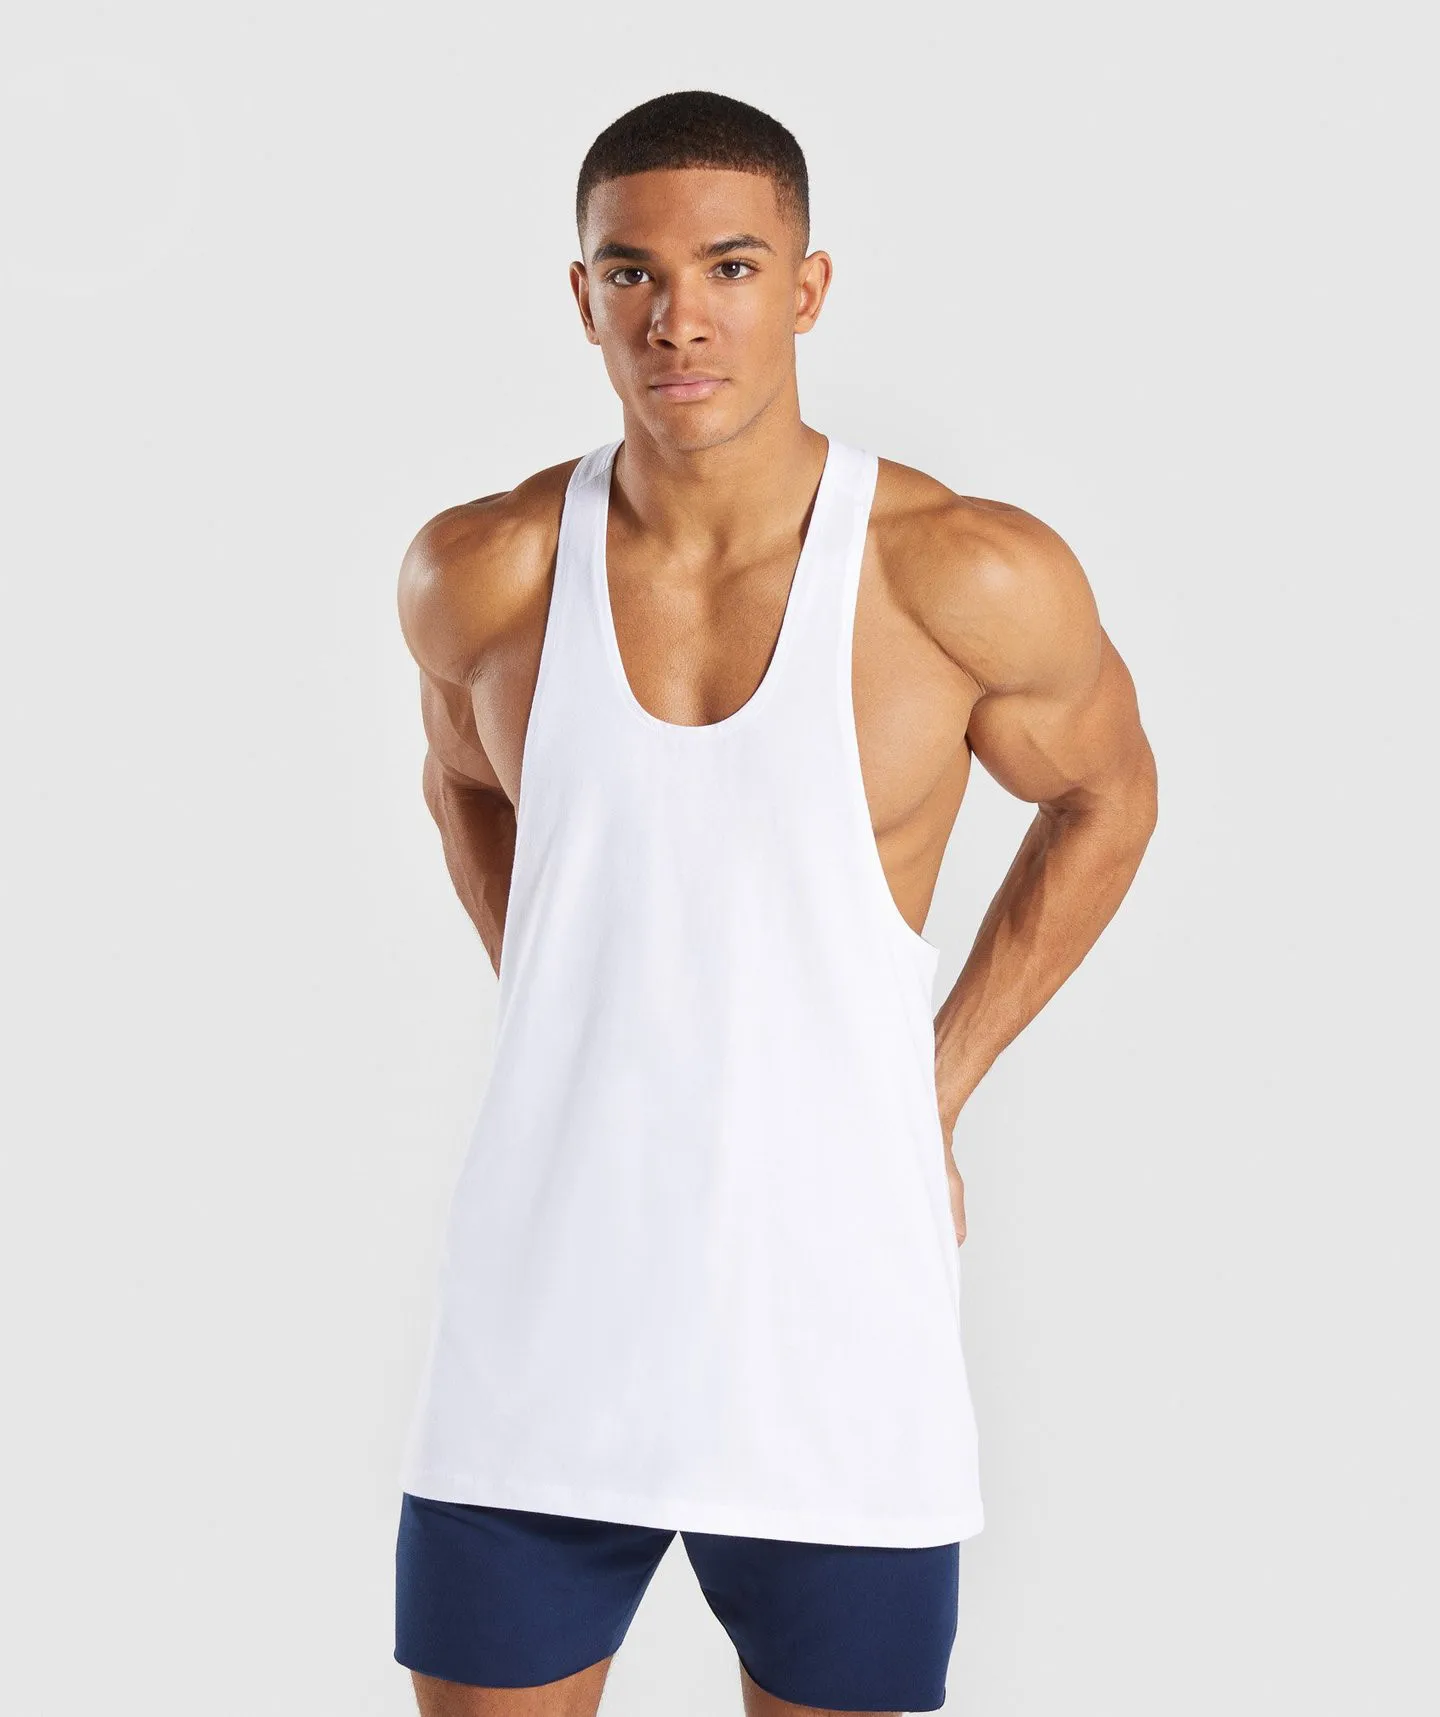 whisky Børnepalads Outlook Wholesale Hot Sale Cotton Bodybuilding Quick Dry Tank Tops Mens White  Stringer Gym Singlet For Training Top Tank From m.alibaba.com